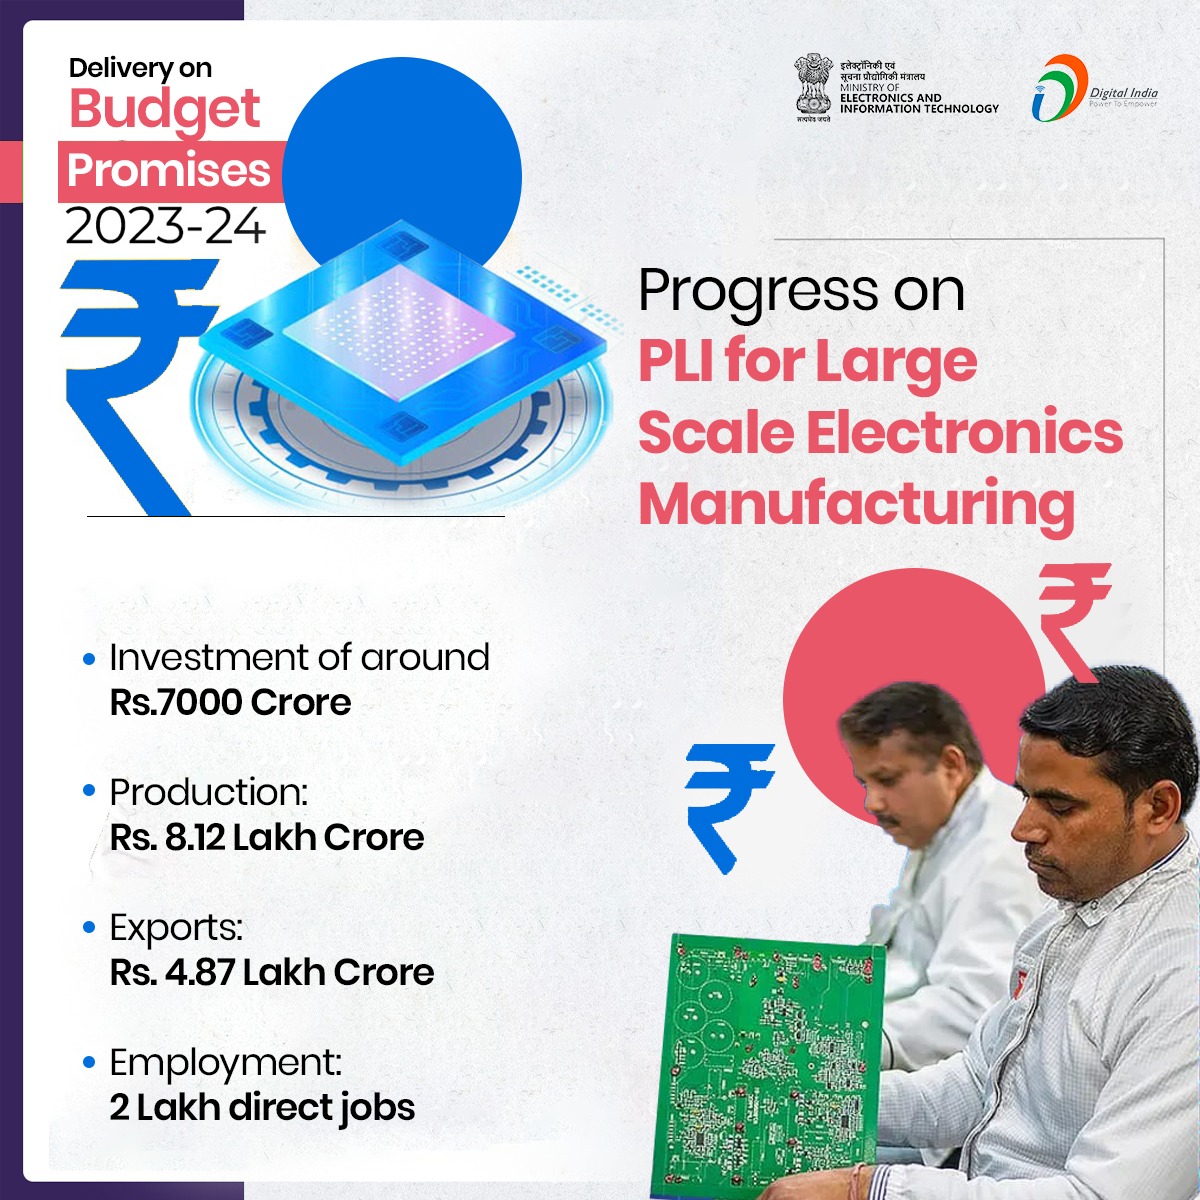 🇮🇳 PLI Scheme for Large Scale Electronics Manufacturing has helped boost #DomesticManufacturing and attract large #investments in the electronics value chain. Visit: meity.gov.in/esdm/pli #Budget2024 #DigitalIndia @GoI_MeitY @Electronics_GoI